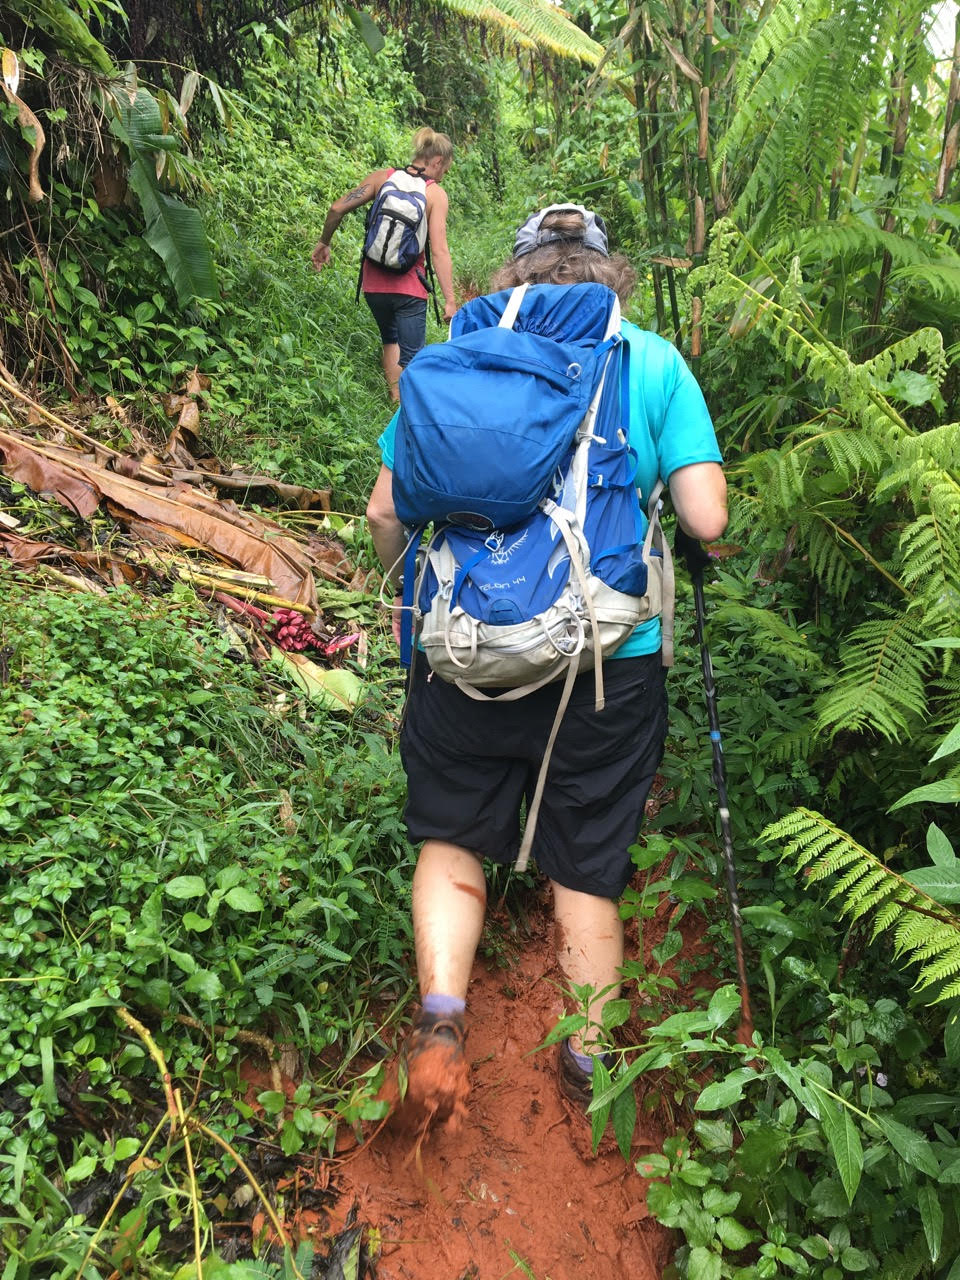 Picture of two hikers on the way through tropical rainforest to Lake Lanoto'o Samoa.